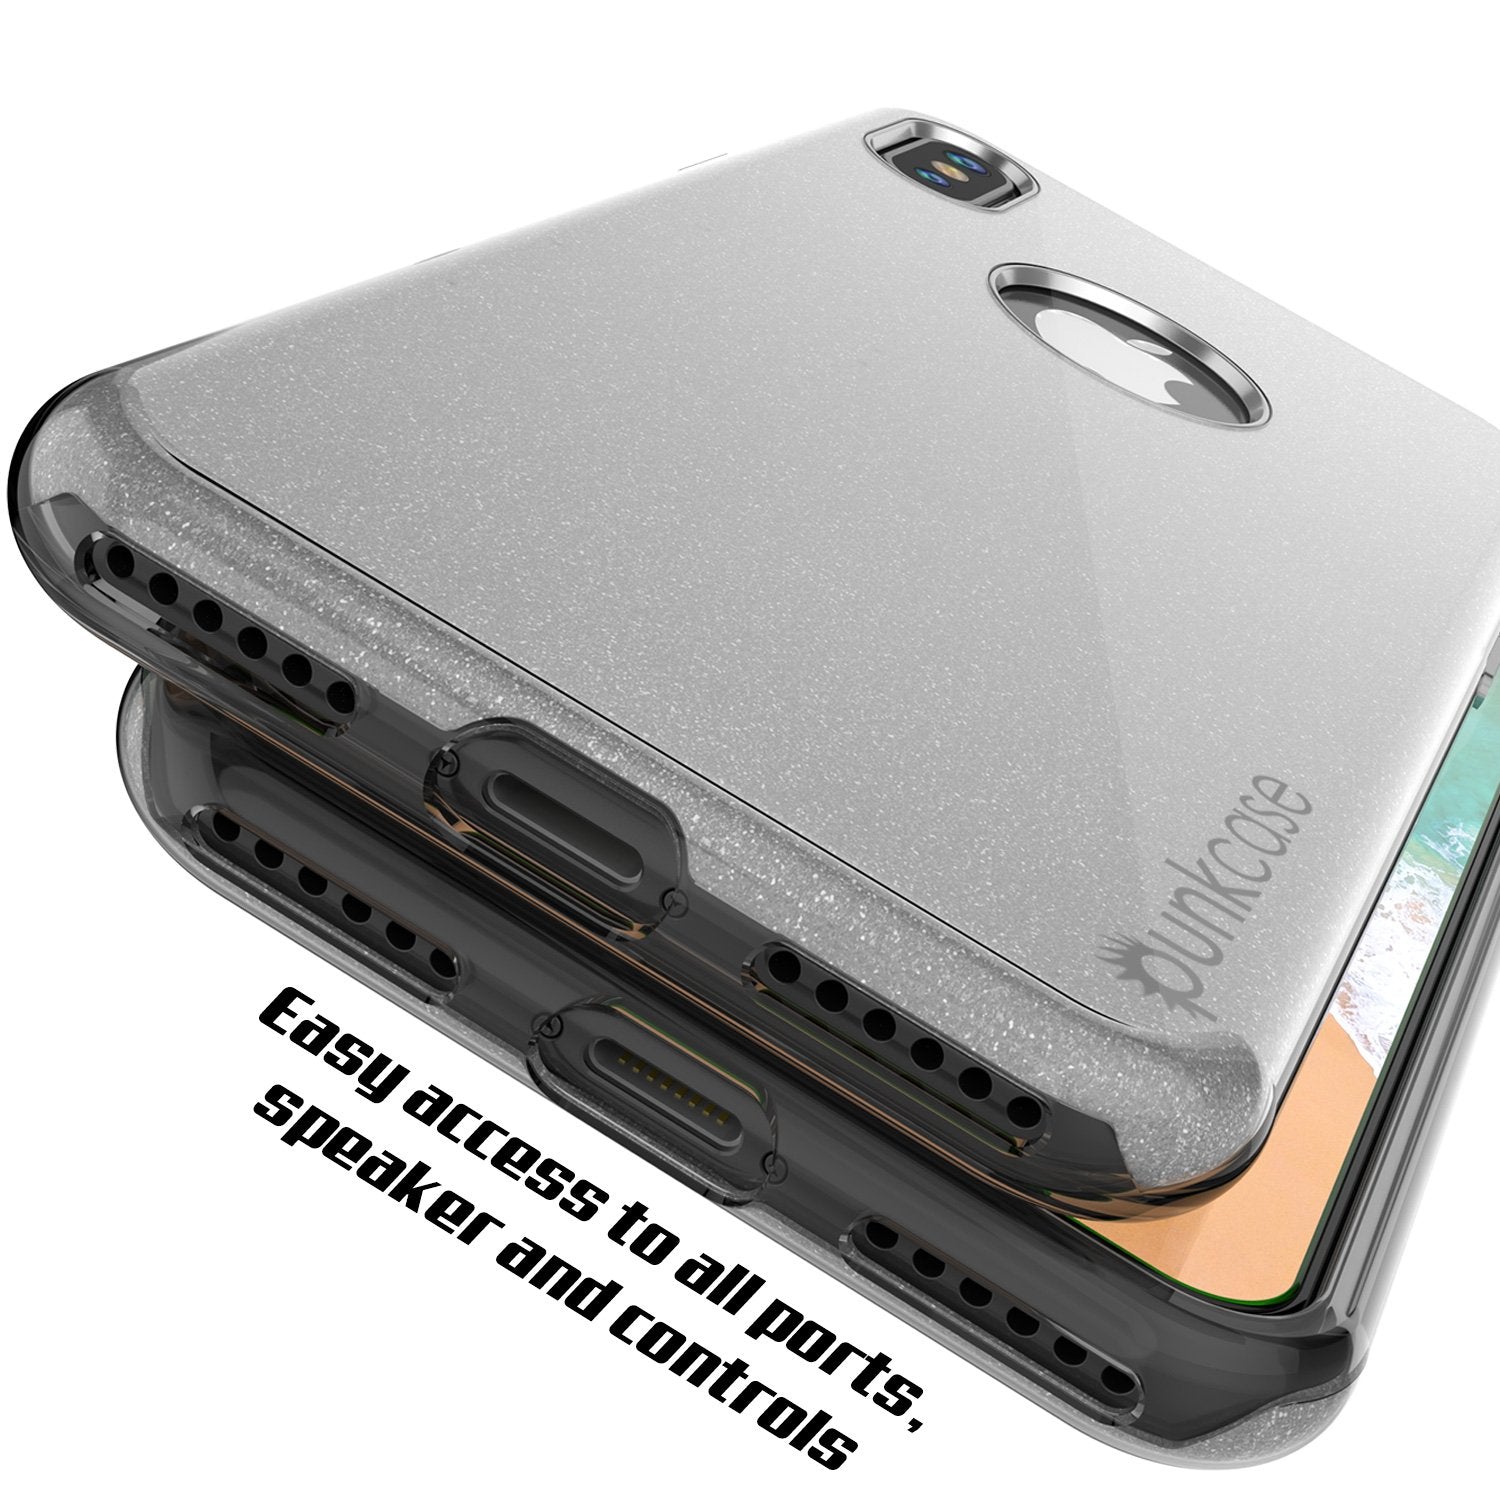 iPhone X Case, Punkcase Galactic 2.0 Series Ultra Slim Cover [Silver]